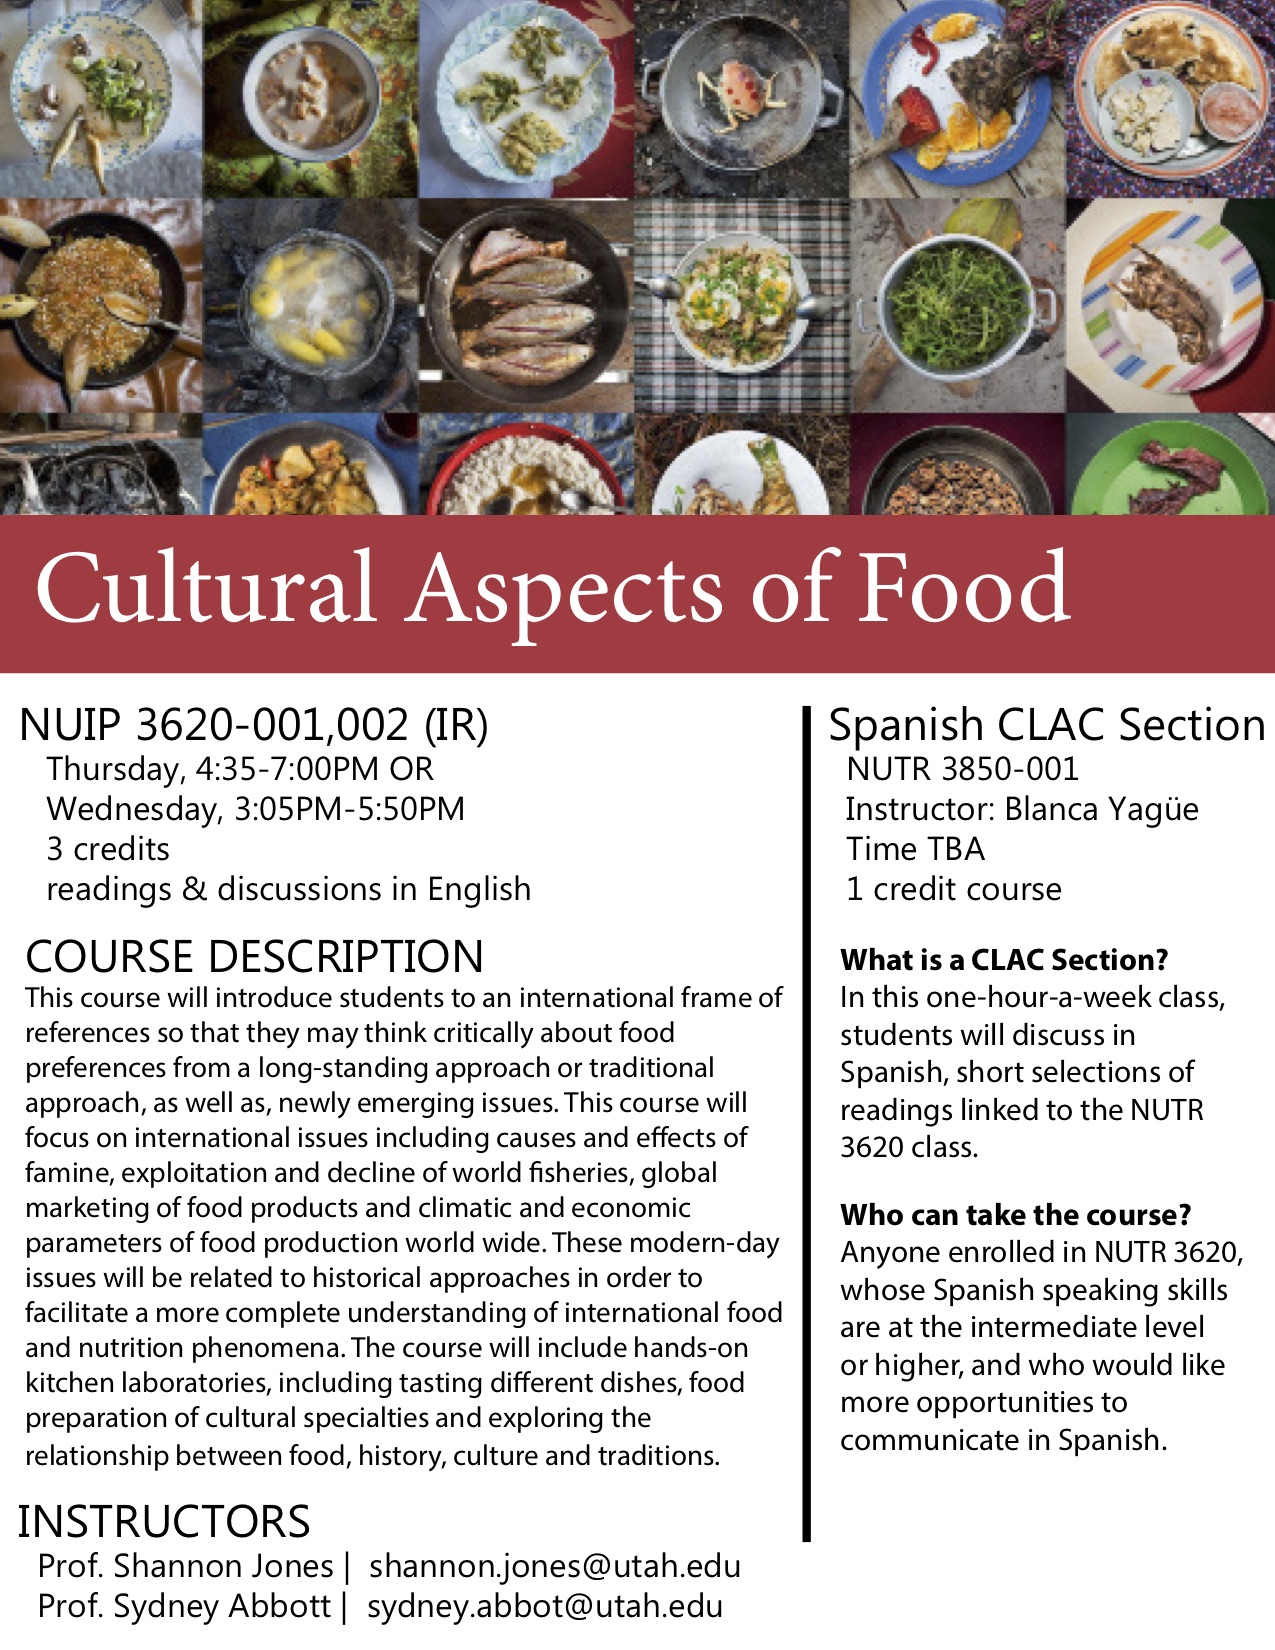 NUTR 3620  Cultural Aspects of Food  Spanish CLAC